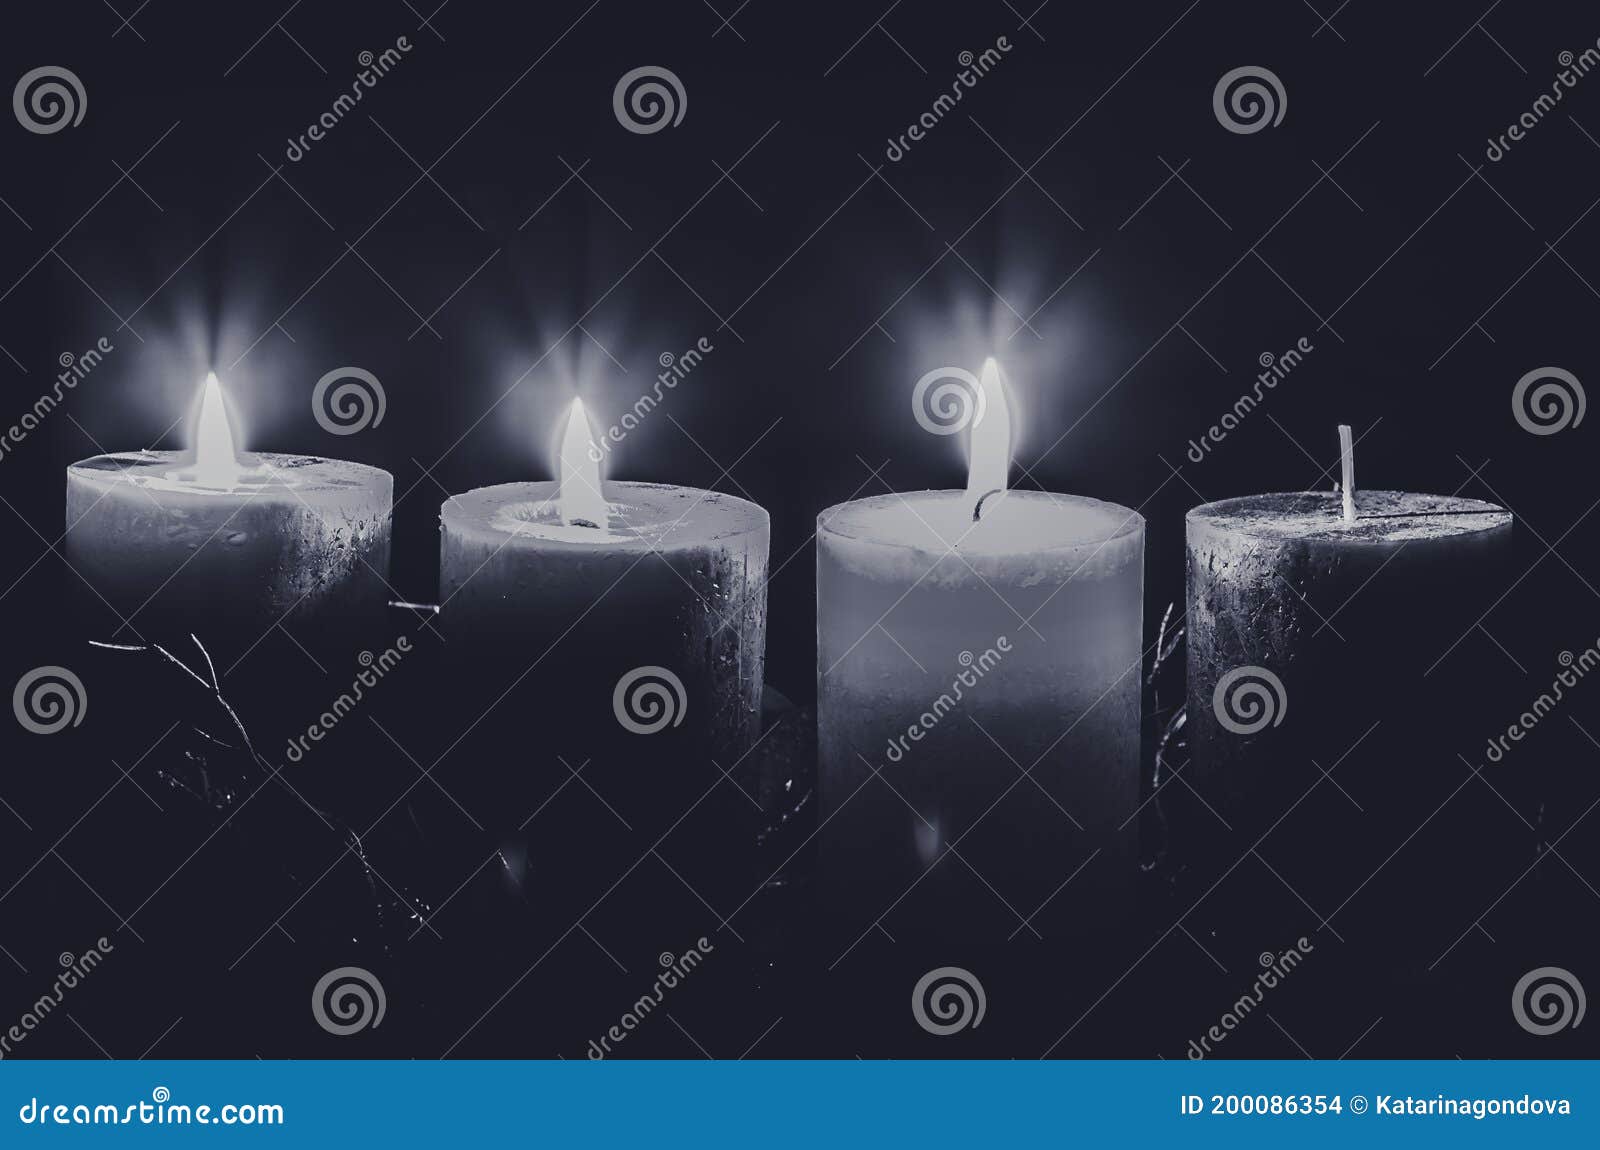 Advent Decoration with Three Burning Candles Stock Photo - Image of ...